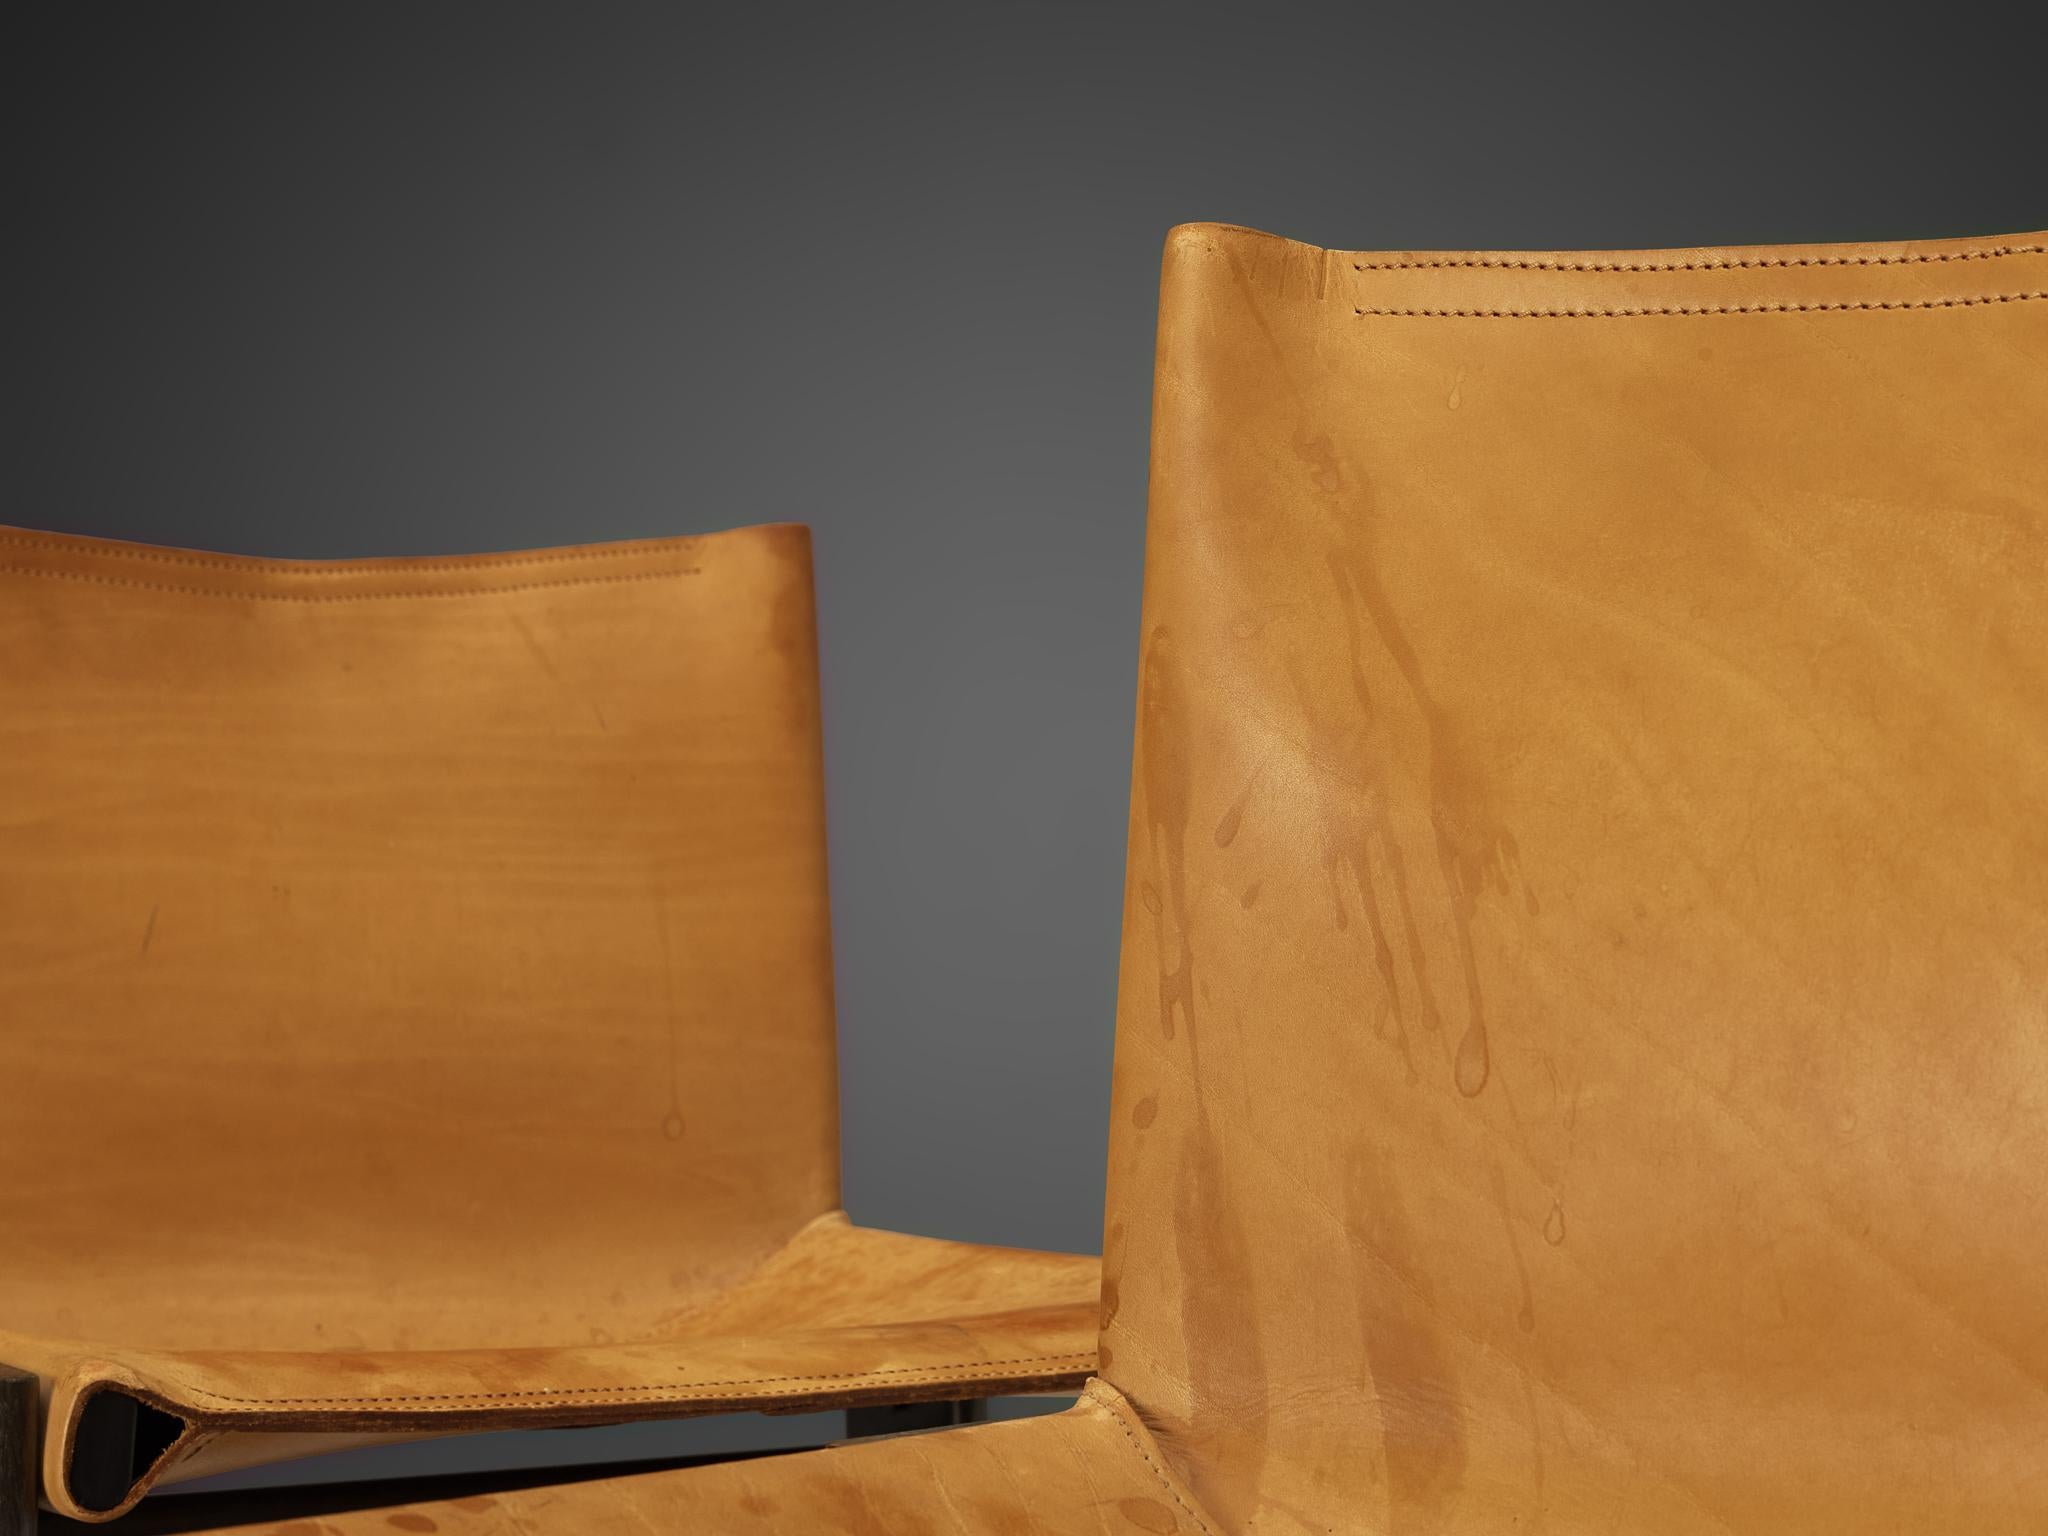 Afra & Tobia Scarpa 'Monk' Chairs in Cognac Leather 2